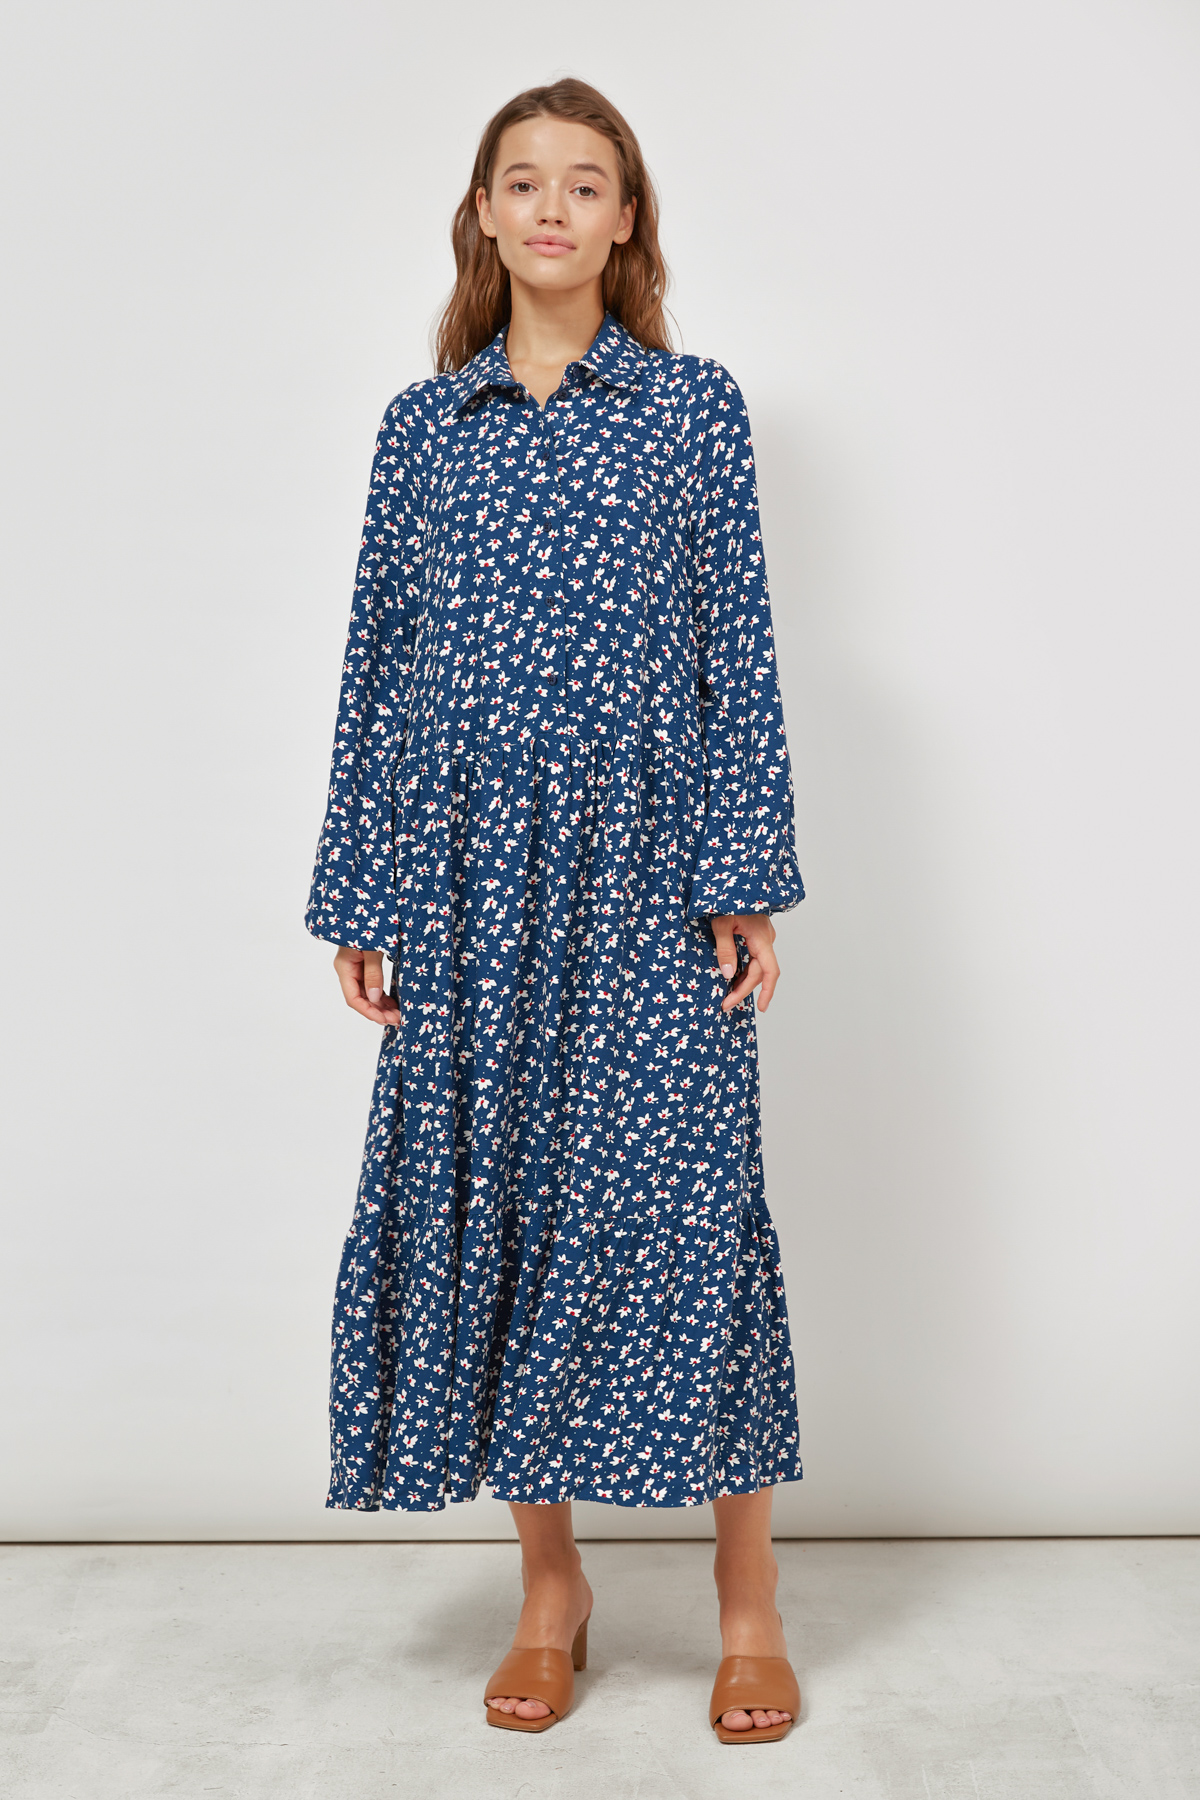 Loose-fit viscose dress in navy blue in print, photo 1